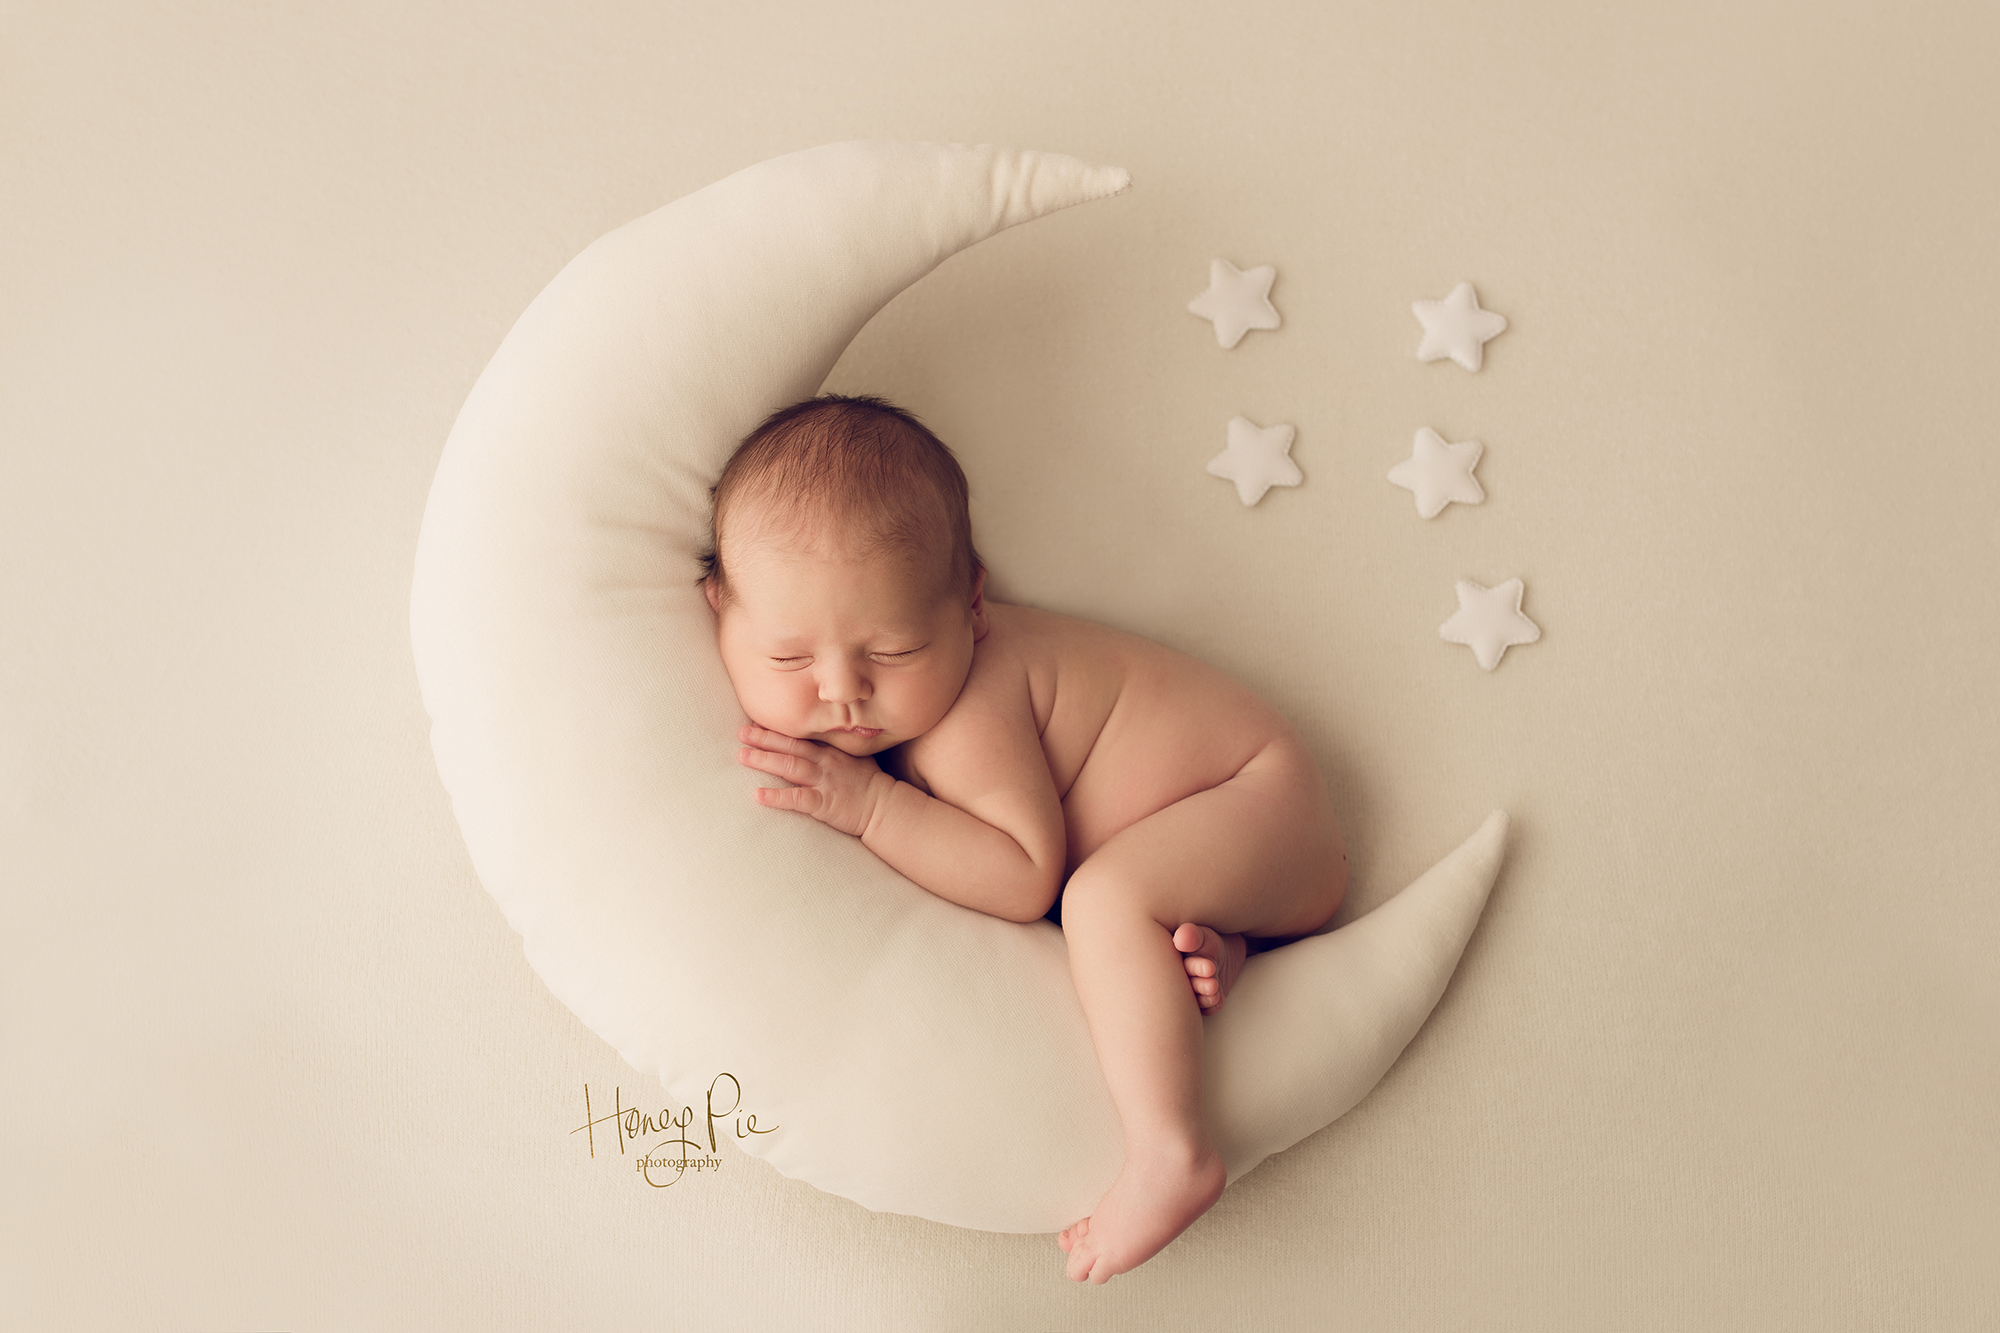 Newborn baby boy sleeping on a cream moon pillow surrounded by stars during his baby photoshoot in brighton